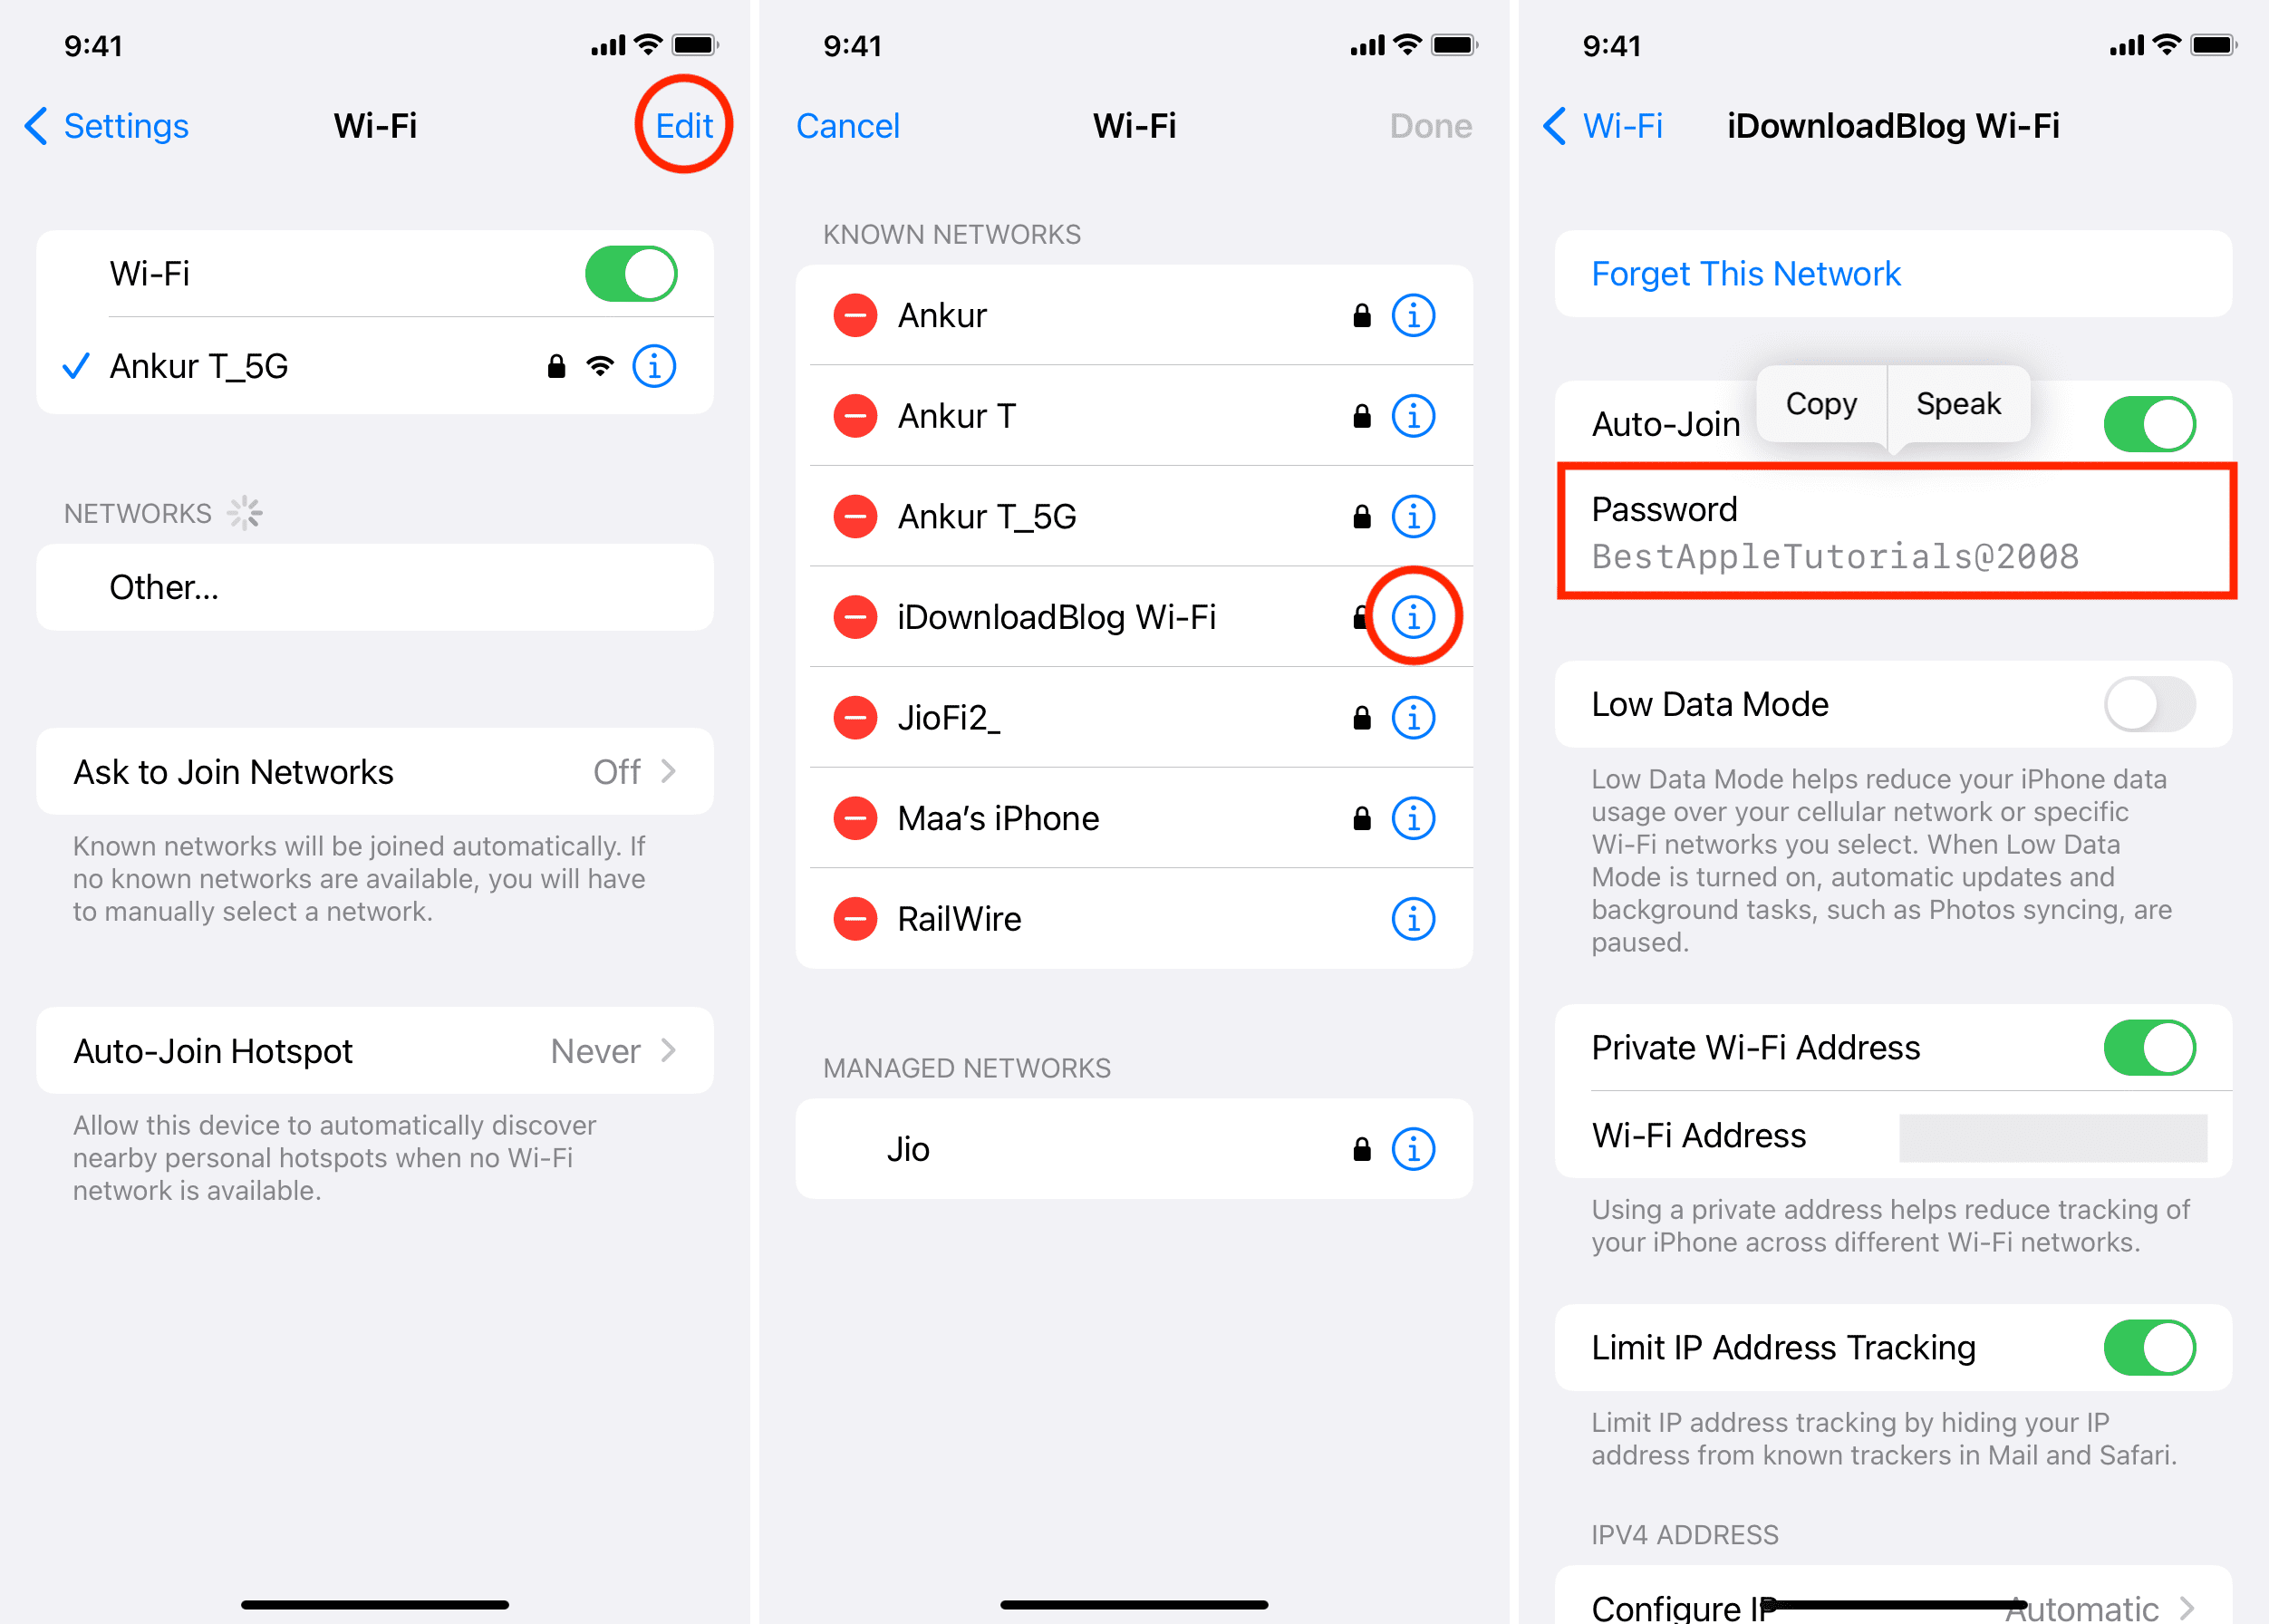 Steps to see password of previously joined, not in range Wi-Fi networks on iPhone